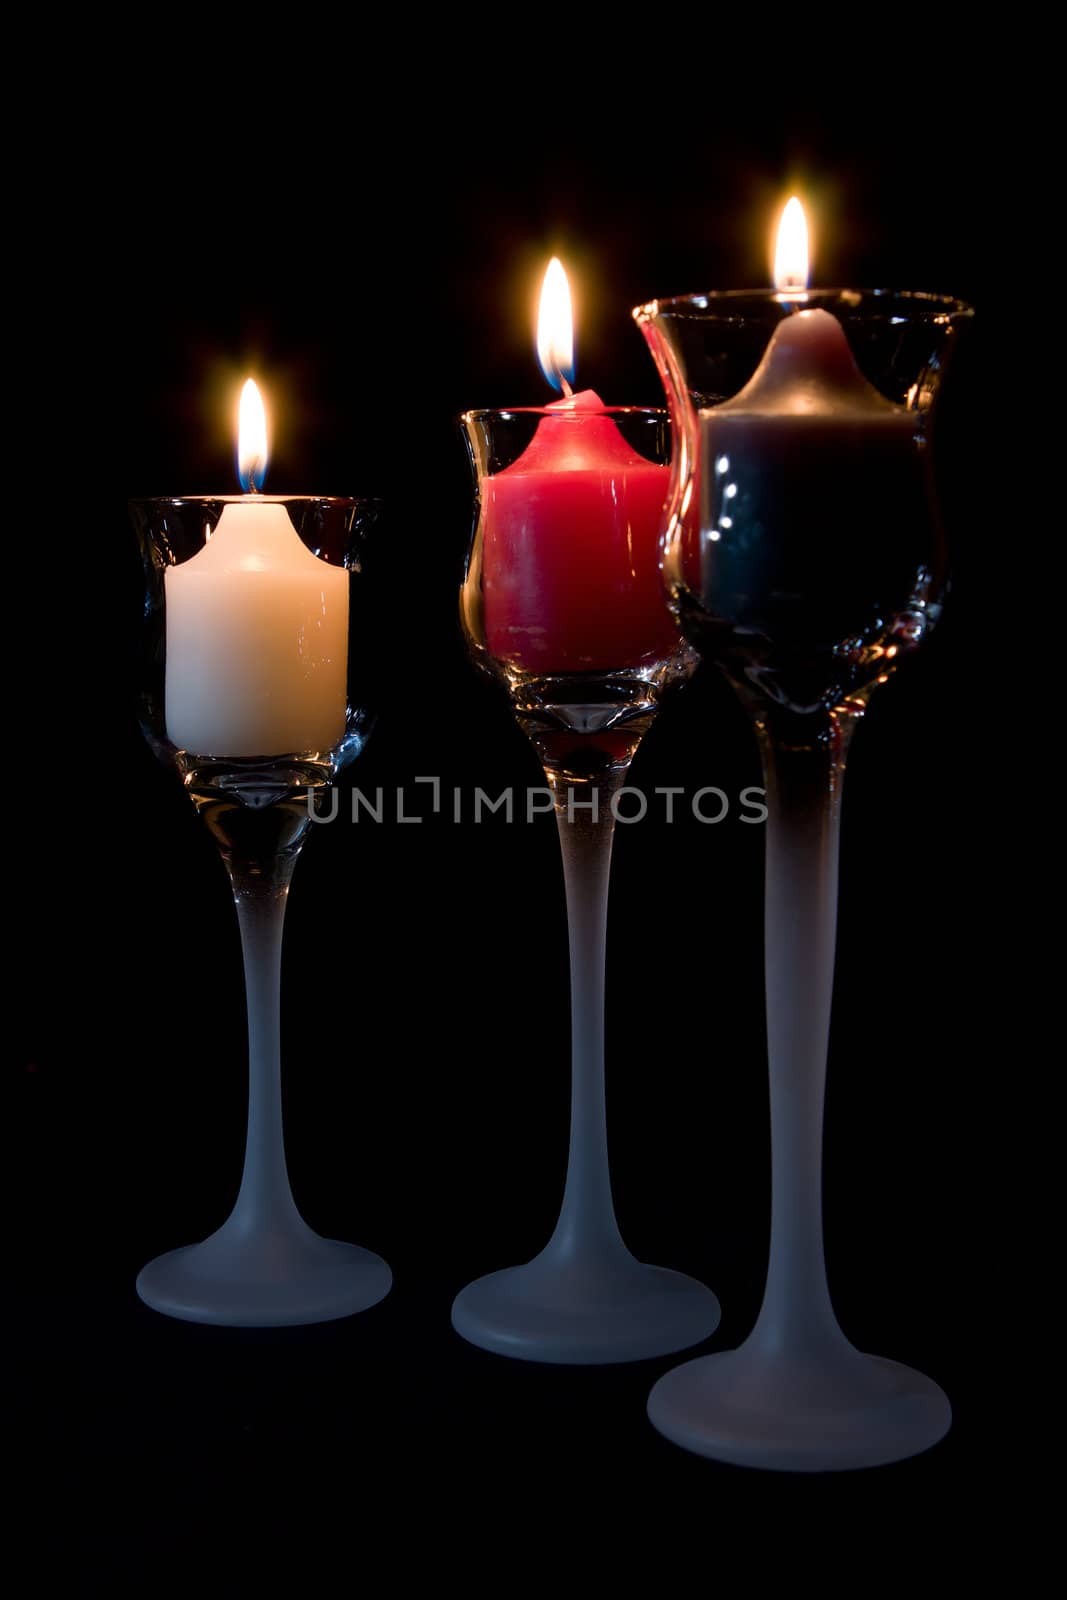 Three (3) Candles burning in decorative candle holders.